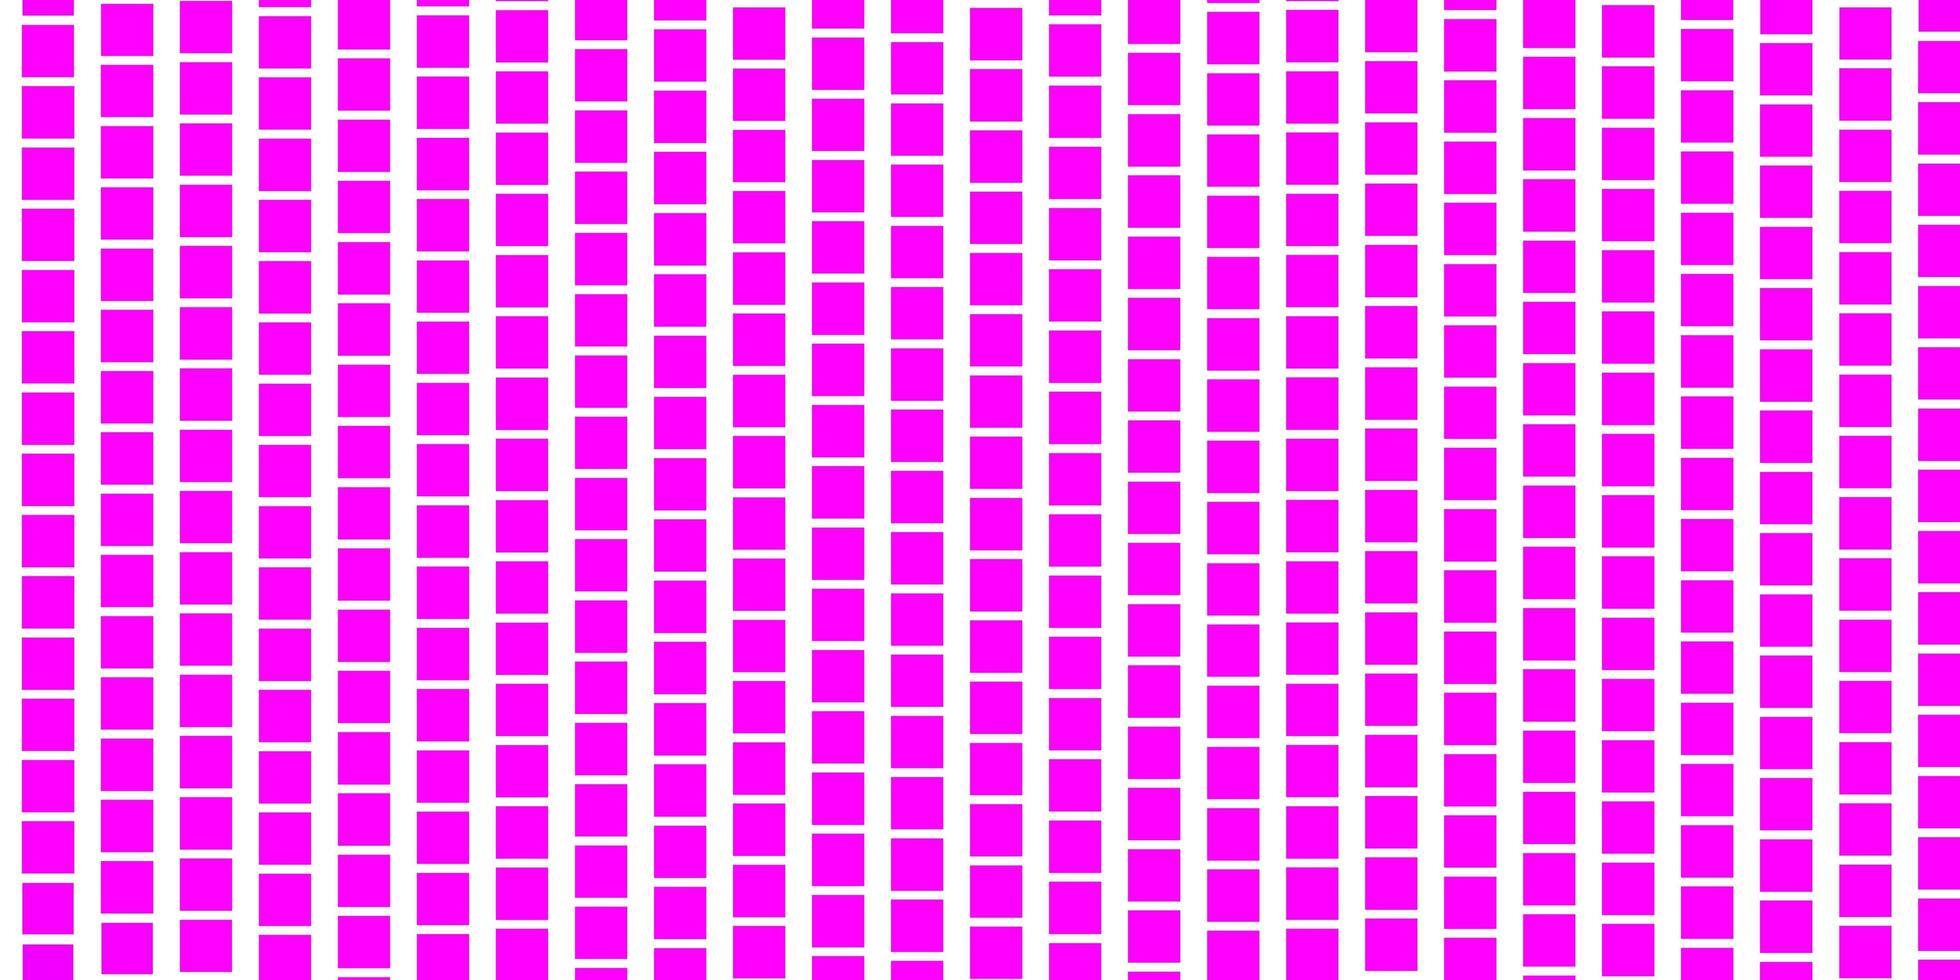 Light Purple vector backdrop with rectangles. Abstract gradient illustration with rectangles. Pattern for business booklets, leaflets